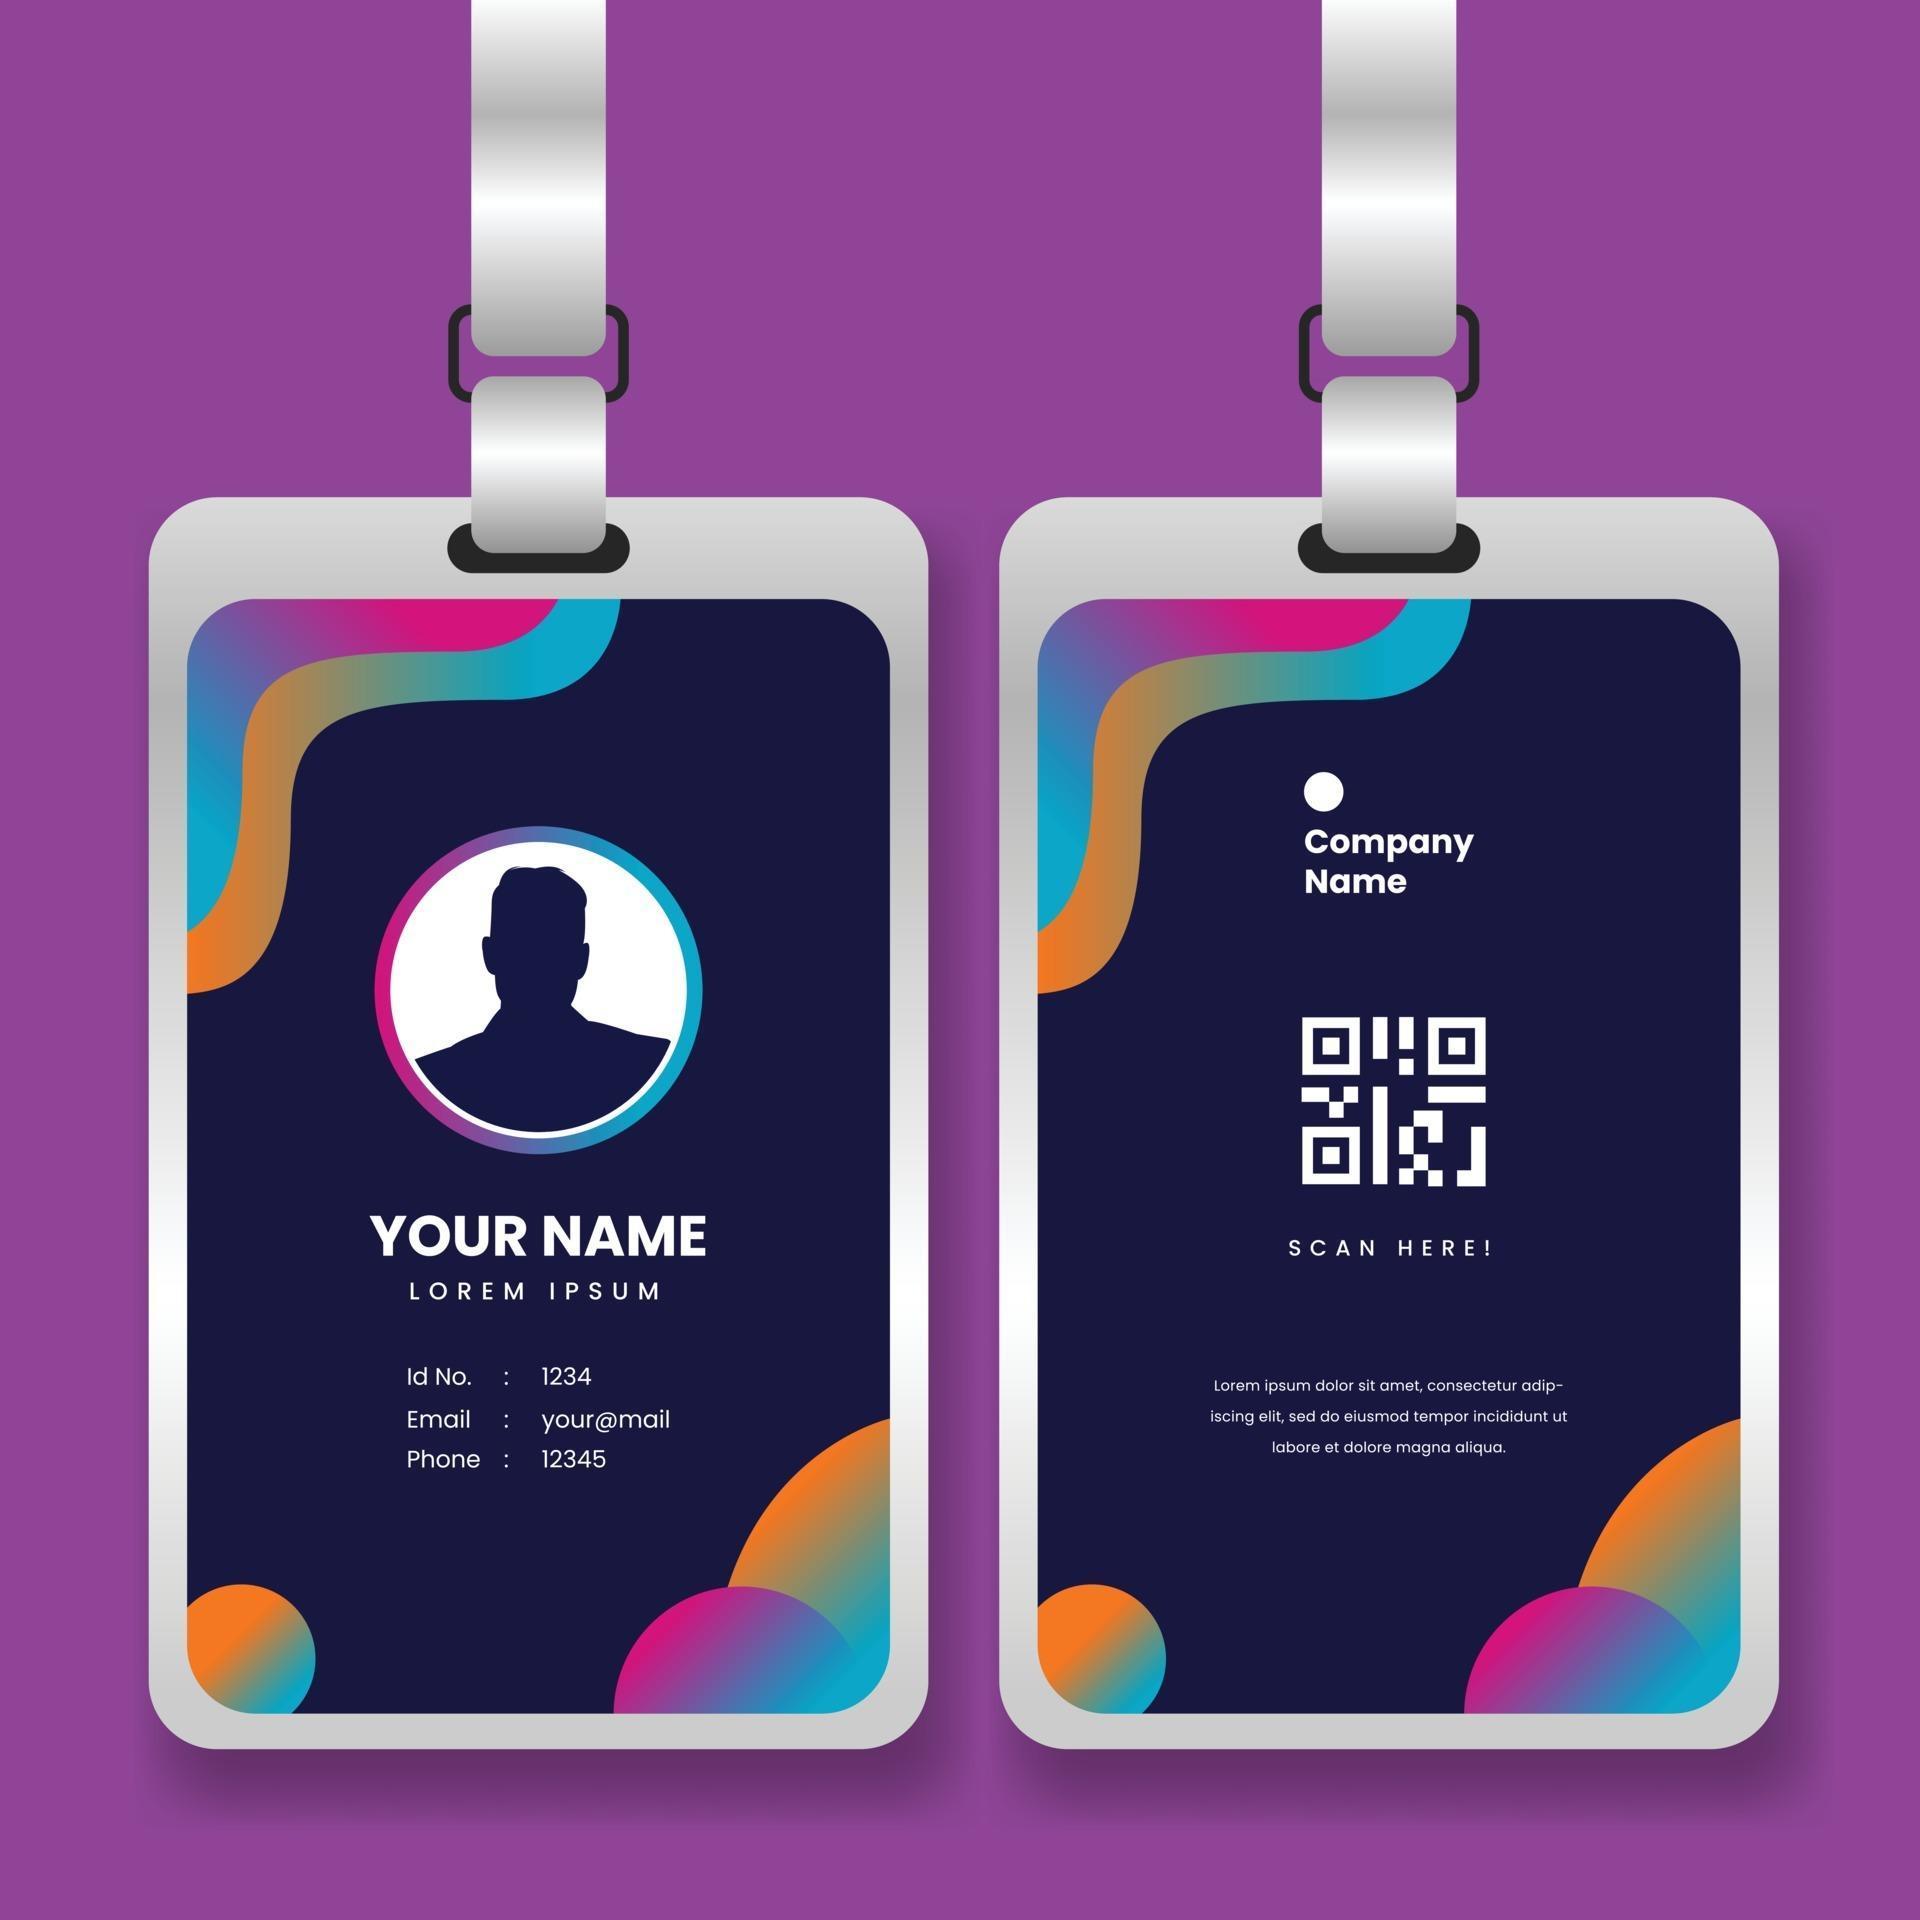 professional-corporate-id-card-template-with-mockup-2741082-vector-art